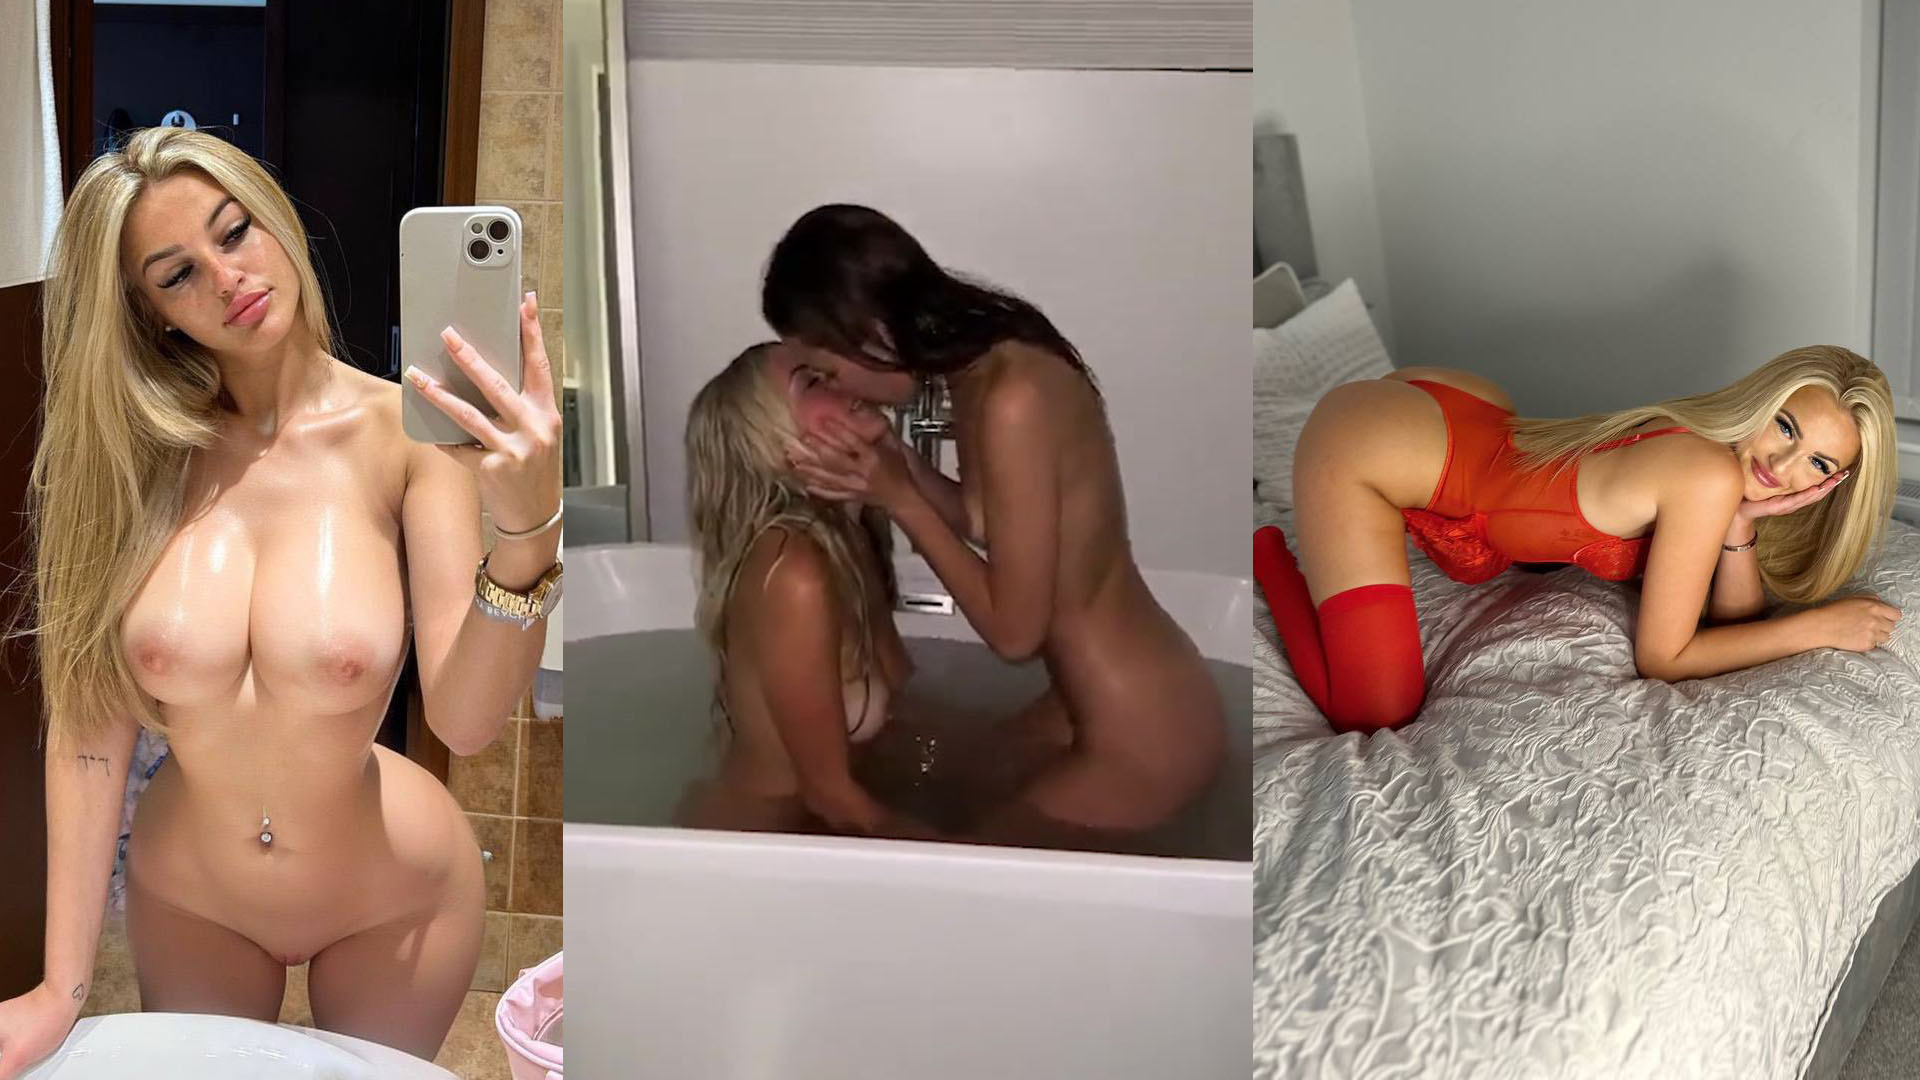 sophie aspin Lesbian Sex Tape From Onlyfans!!